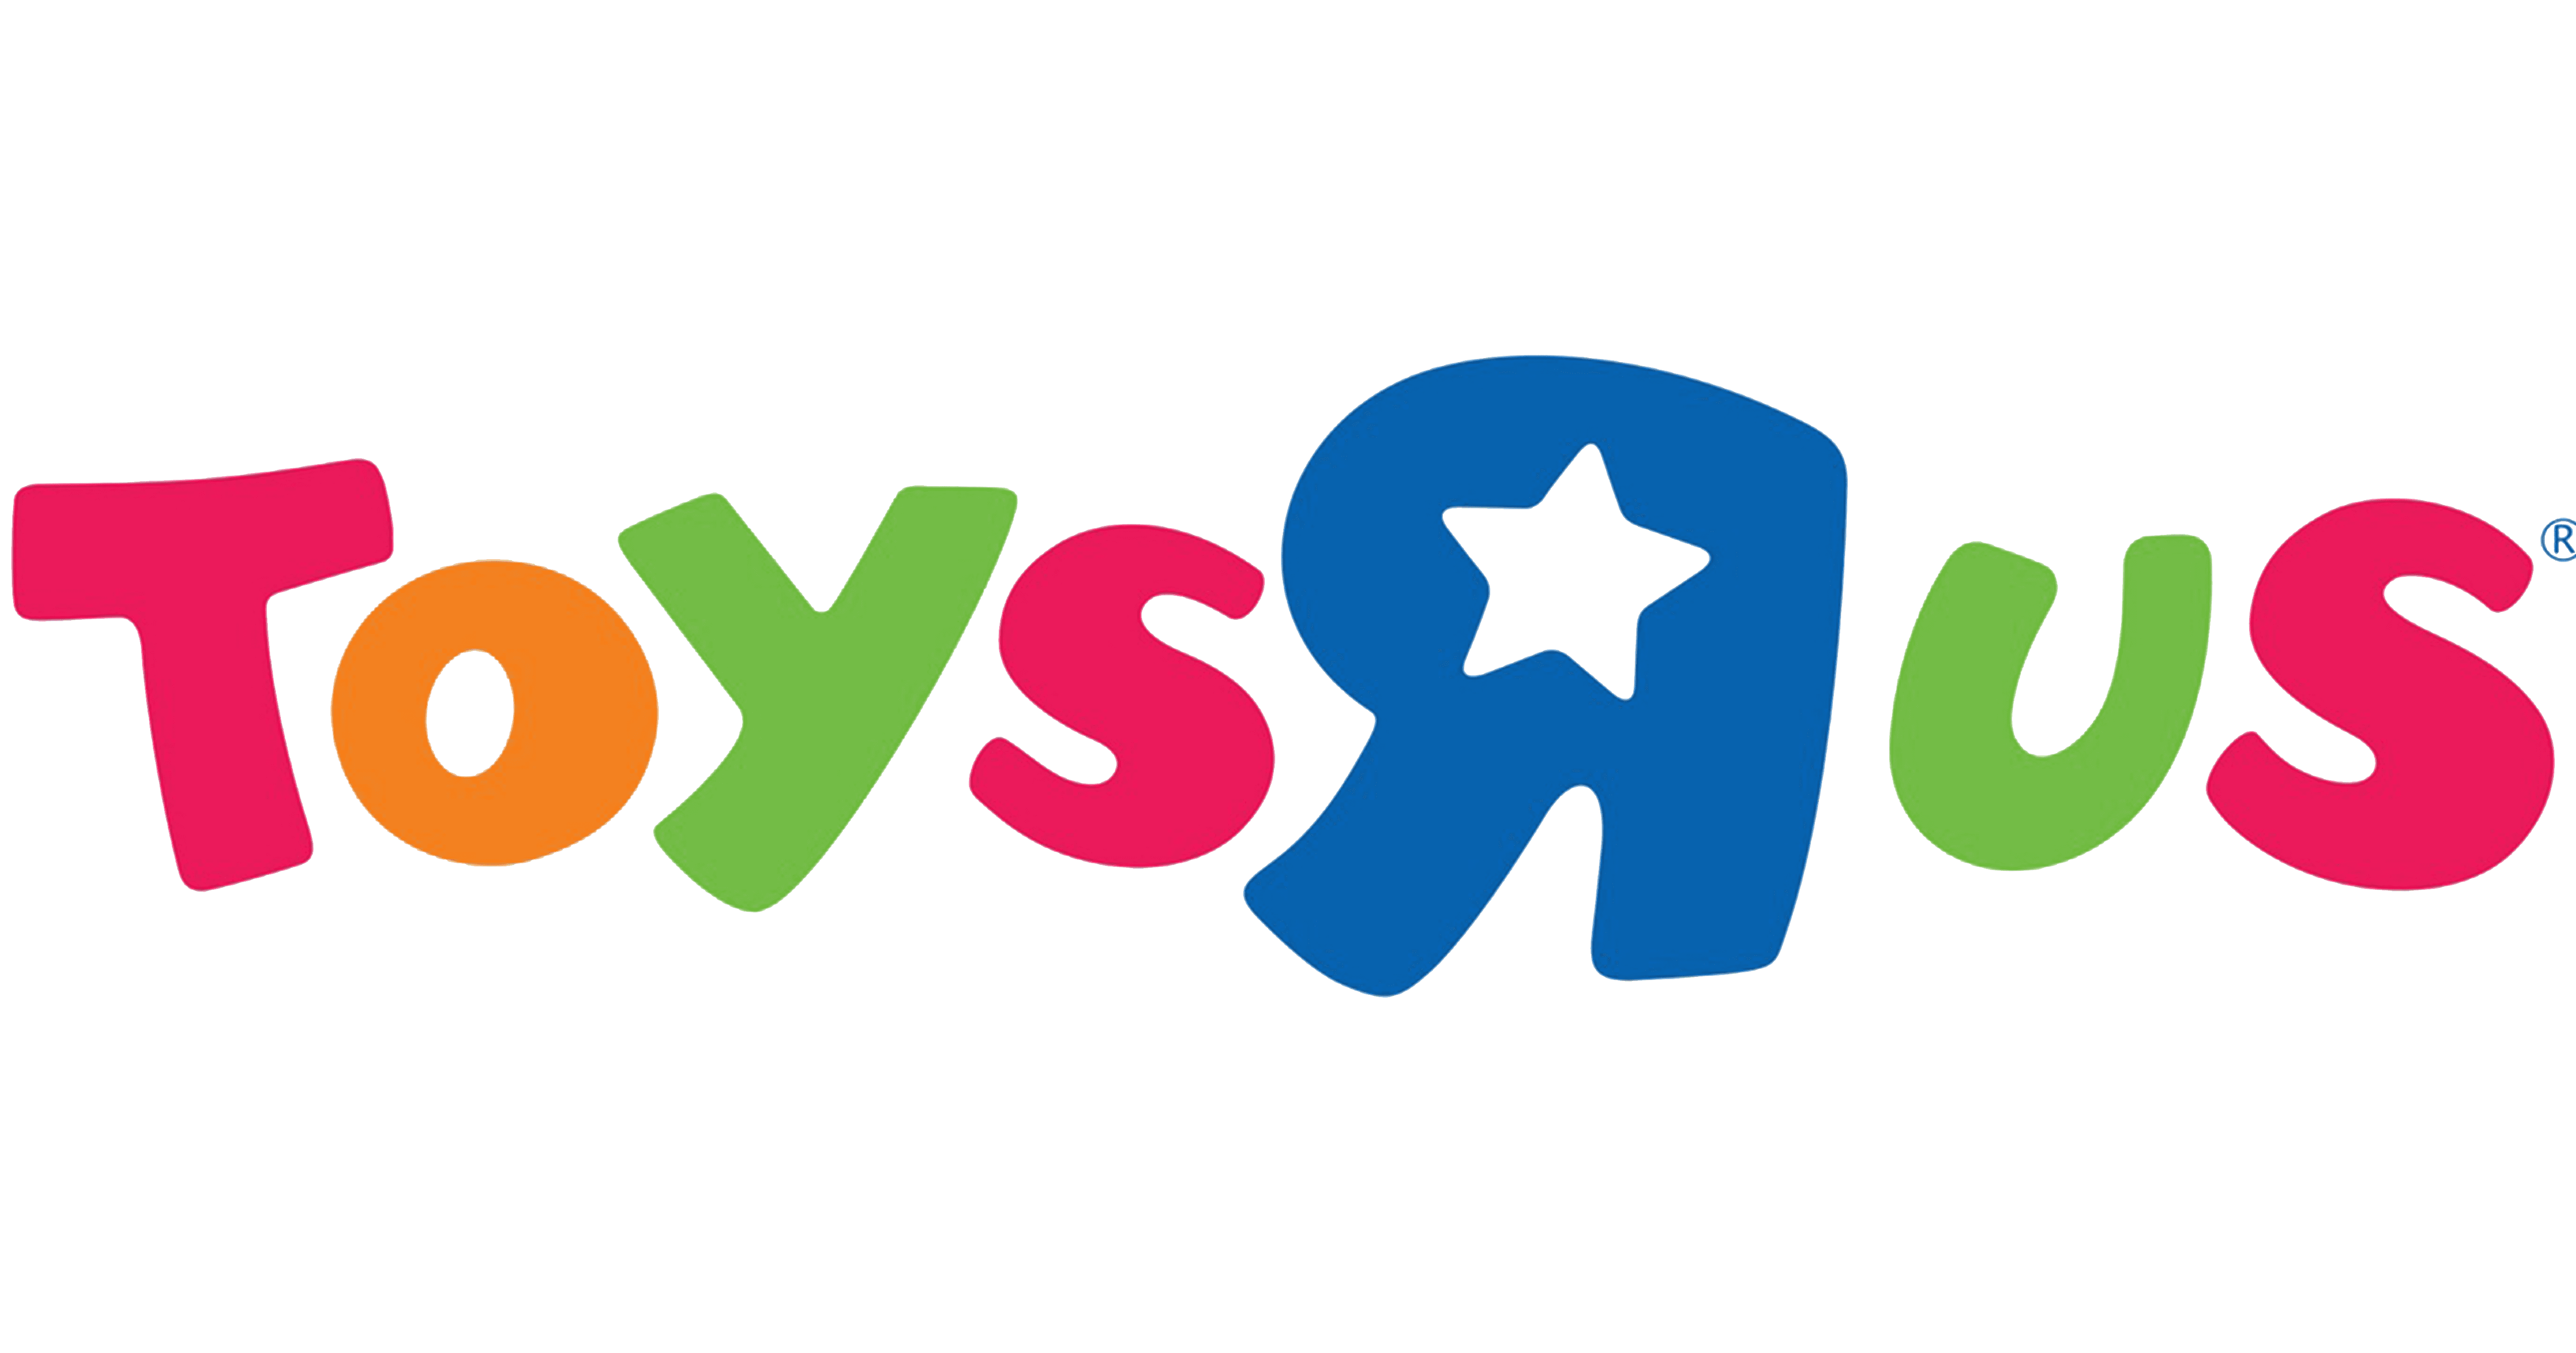 toys-r-us-logo-and-symbol-meaning-history-png-brand